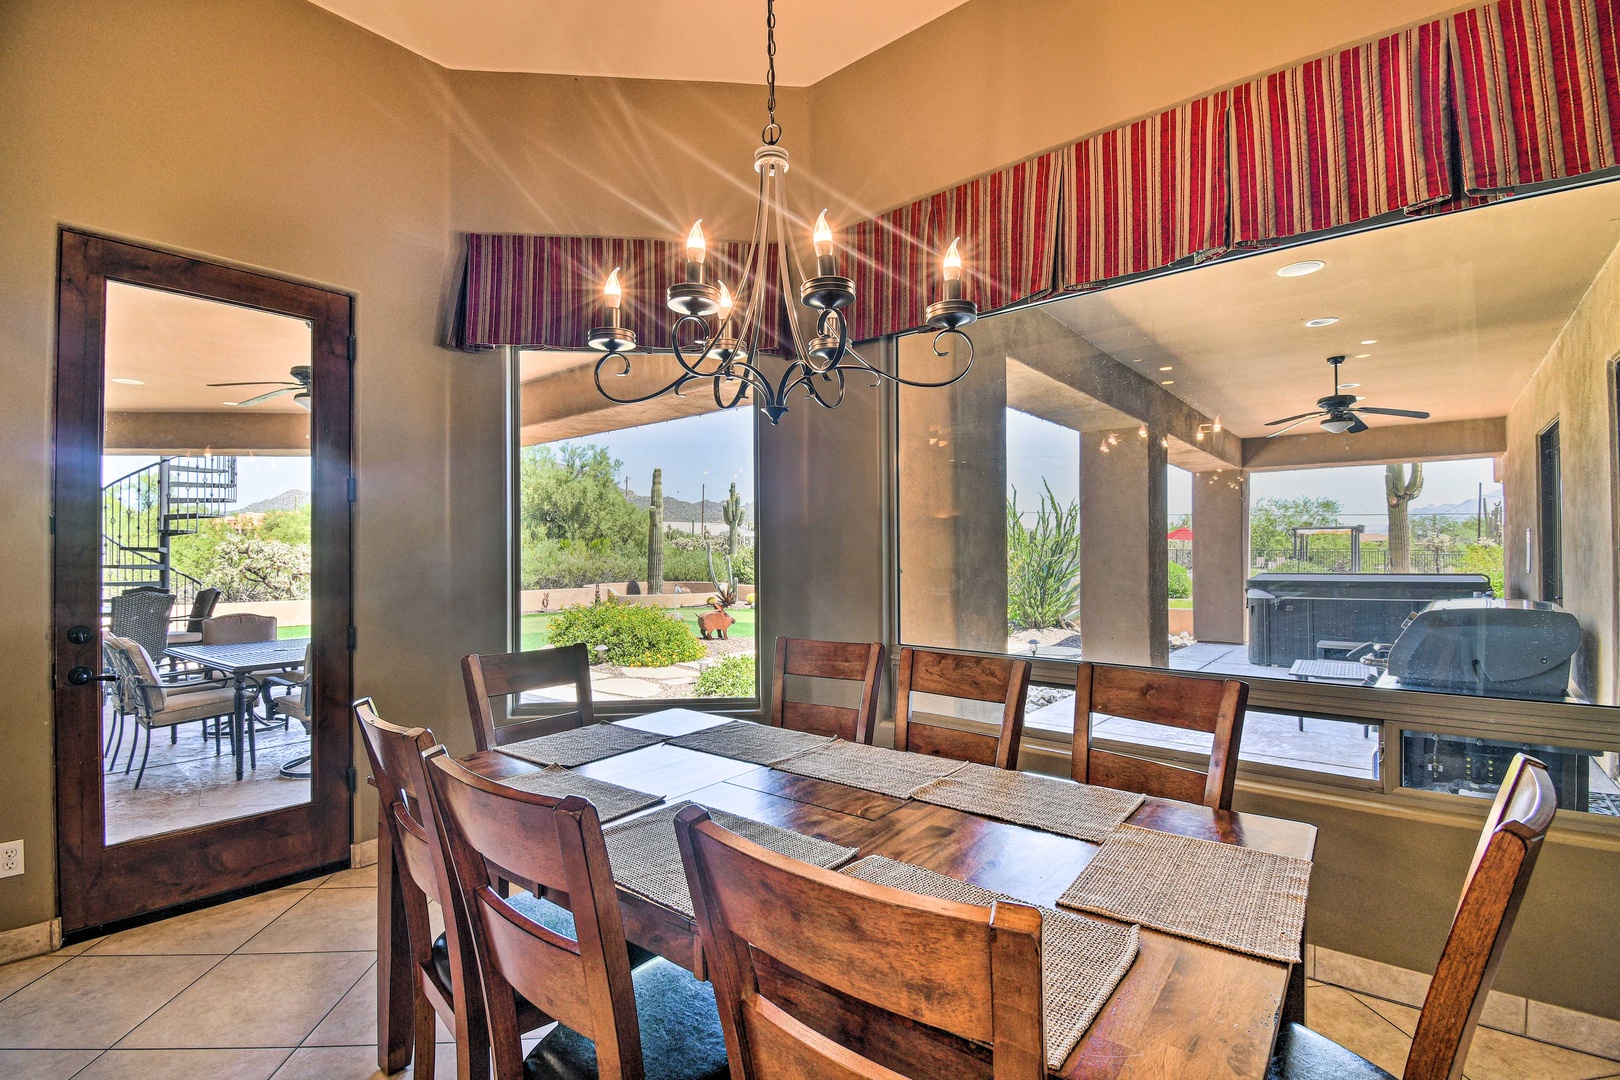 Gather for meals together at the dining table, with seating for 8